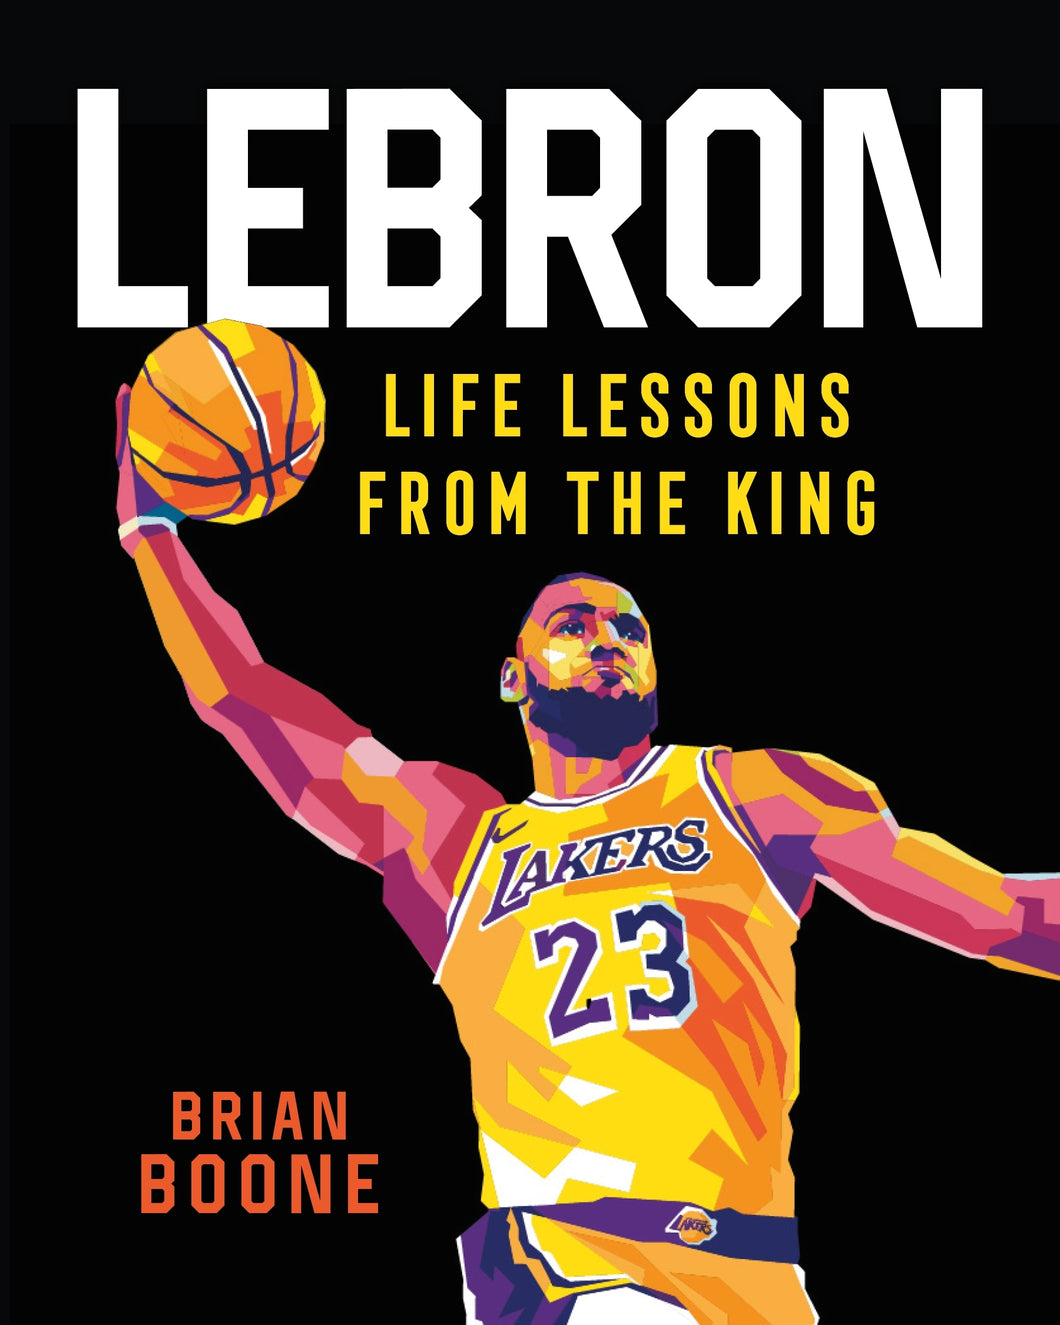 Lebron: Life Lessons from the King by Brian Boone